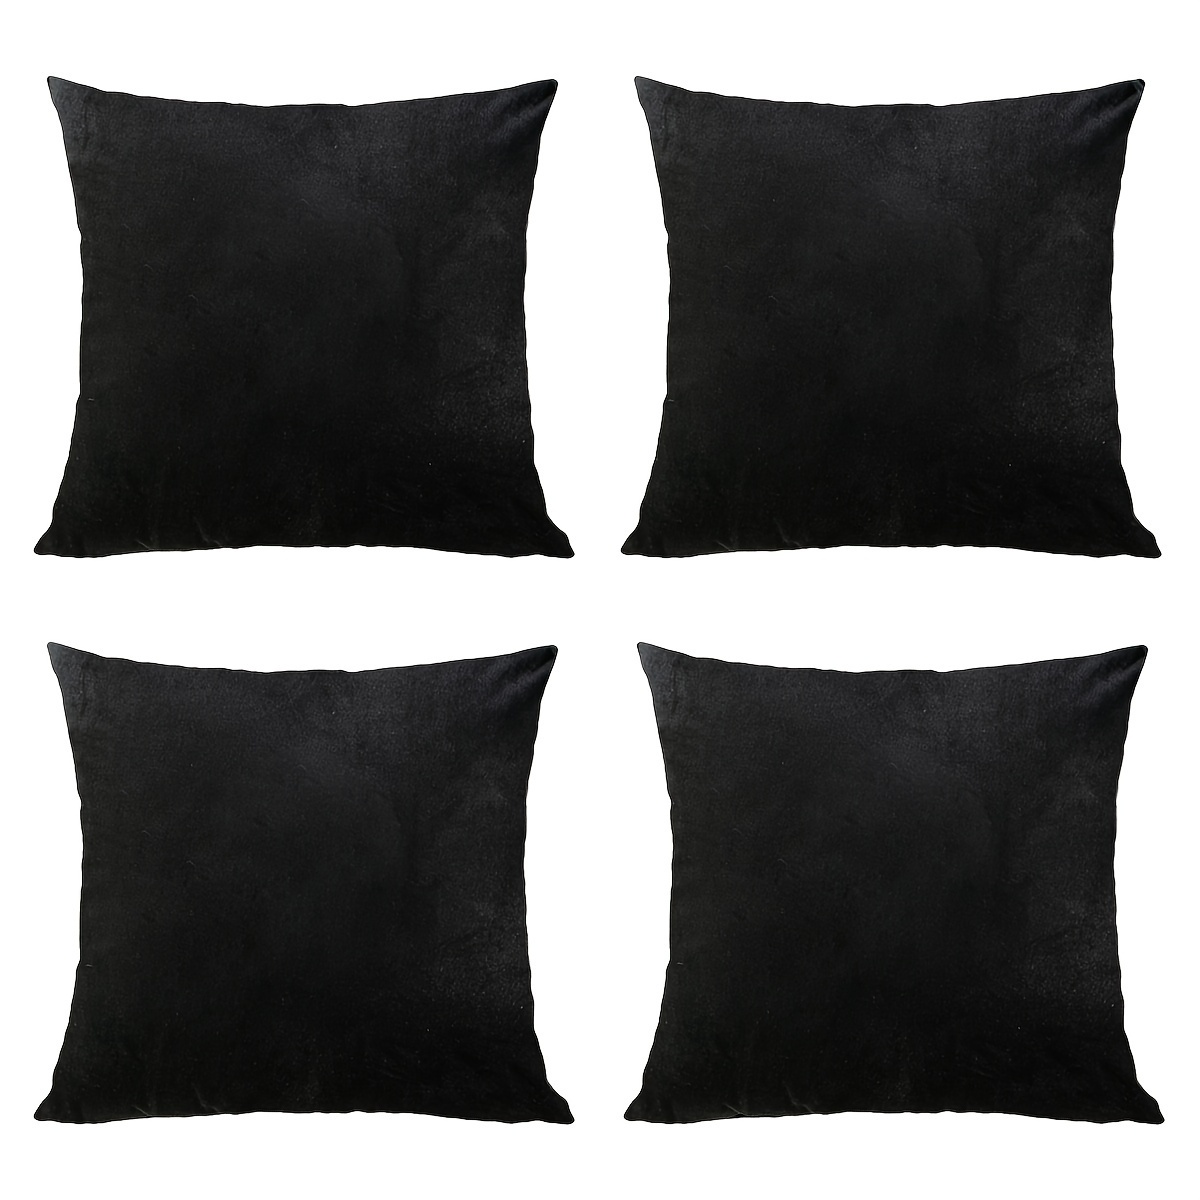 

4pcs/set, Black Pattern Polyester Cushion Cover, Pillow Cover, Room Decor, Bedroom Decor, Sofa Decor, Collectible Buildings Accessories (cushion Is Not Included)